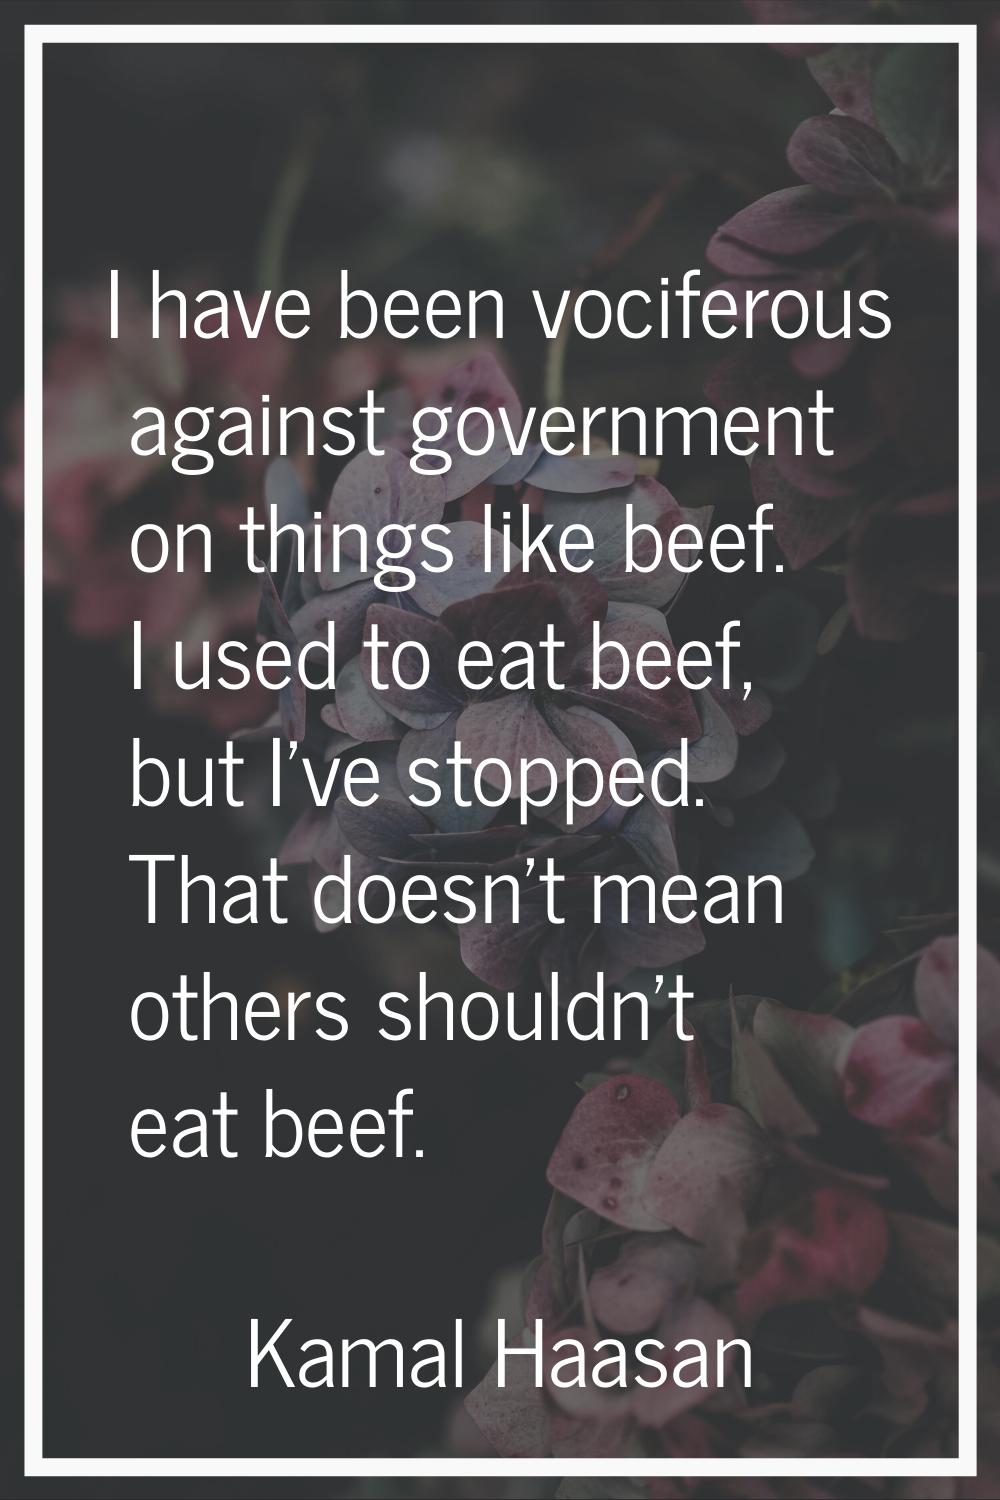 I have been vociferous against government on things like beef. I used to eat beef, but I've stopped